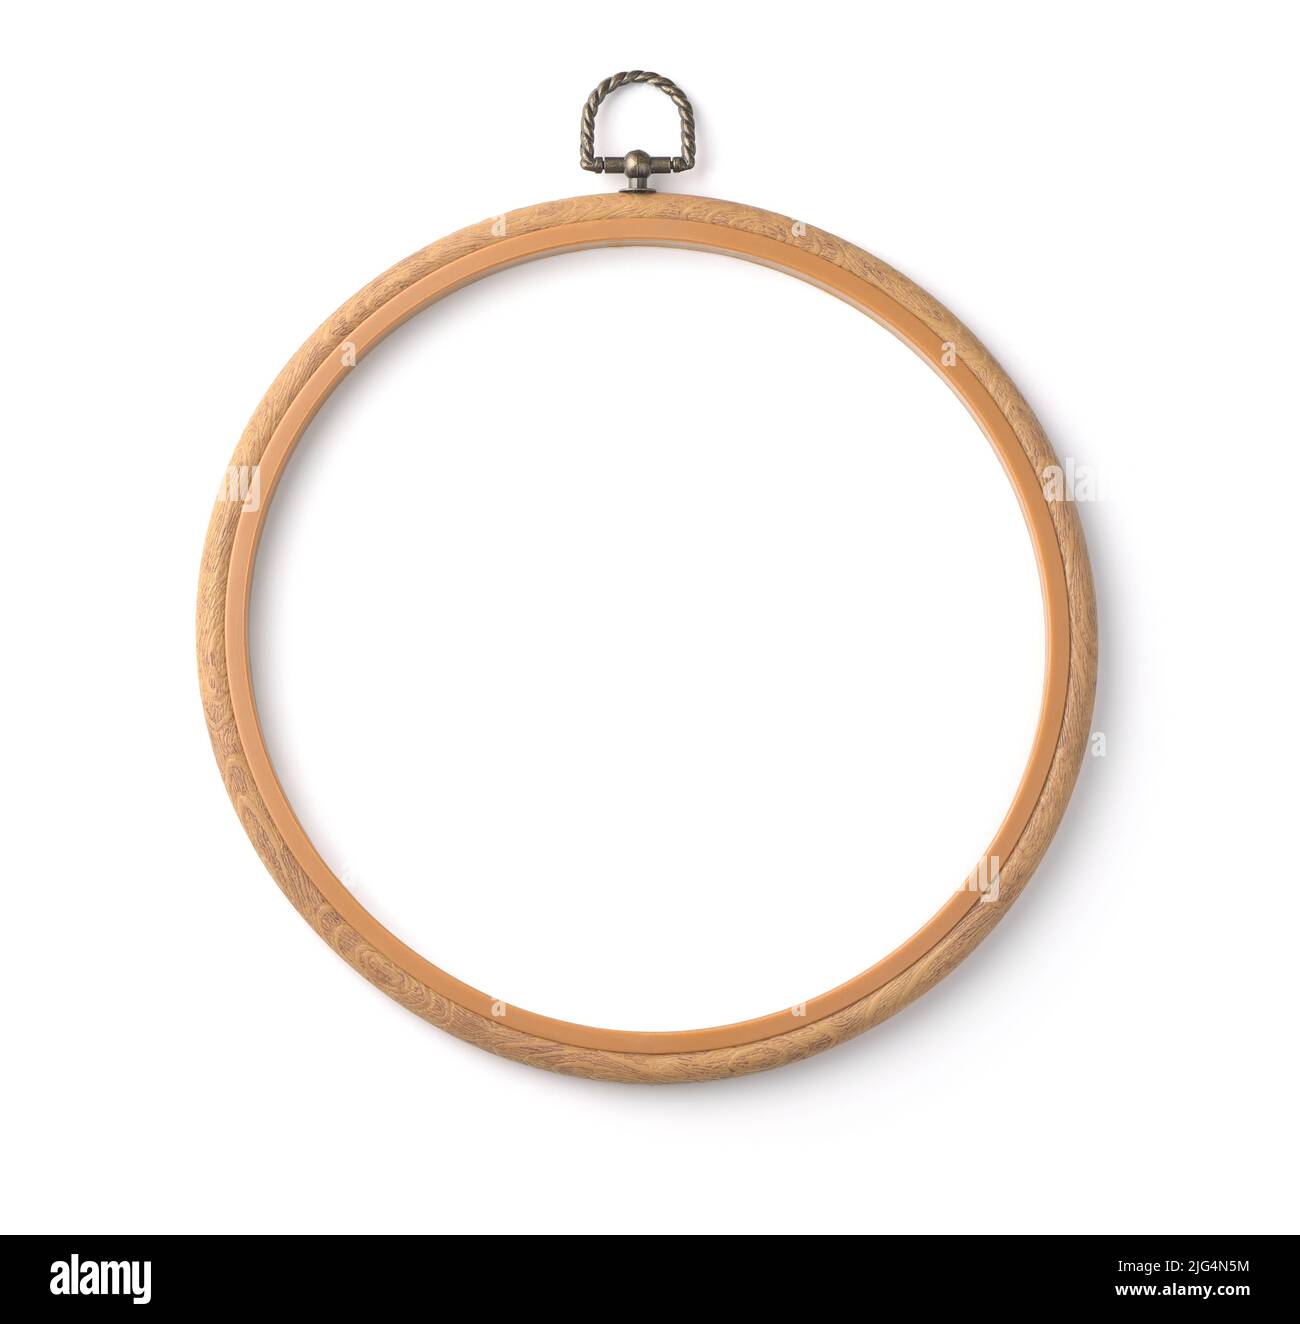 Top view of embroidery cross stitch hoop isolated on white Stock Photo